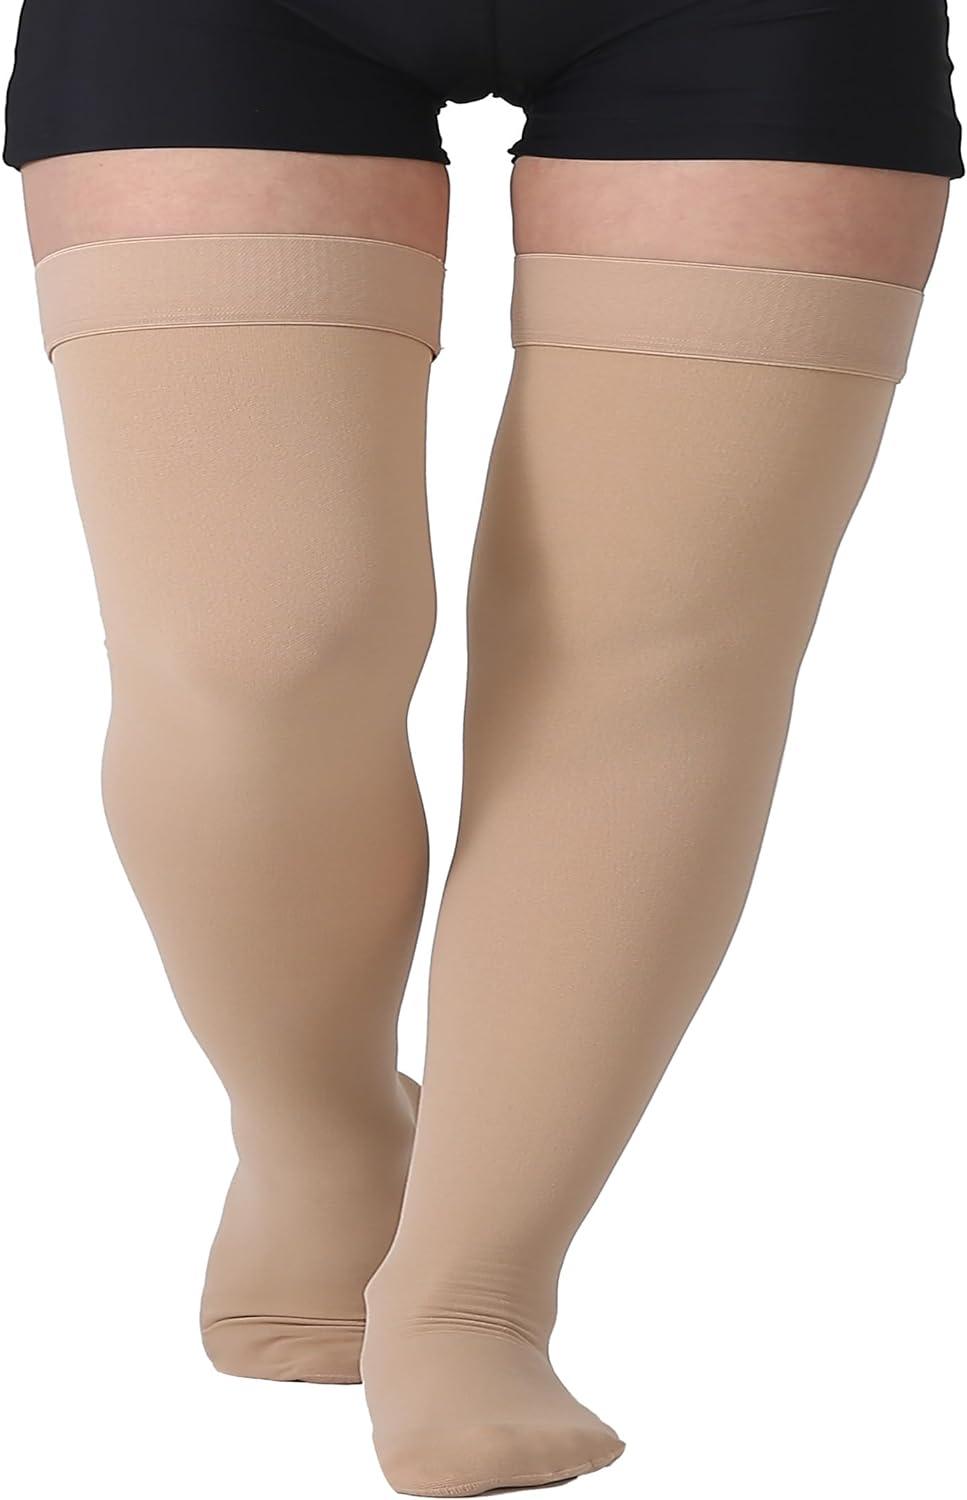 TOFLY Medical Thigh High Compression Stockings for Women & Men Closed Toe  Opaque Firm 20-30mmHg Graduated Compression Socks with Silicone Band  Support for Varicose Veins Edema Travel Beige 3XL 3XL 20-30mmhg Beige